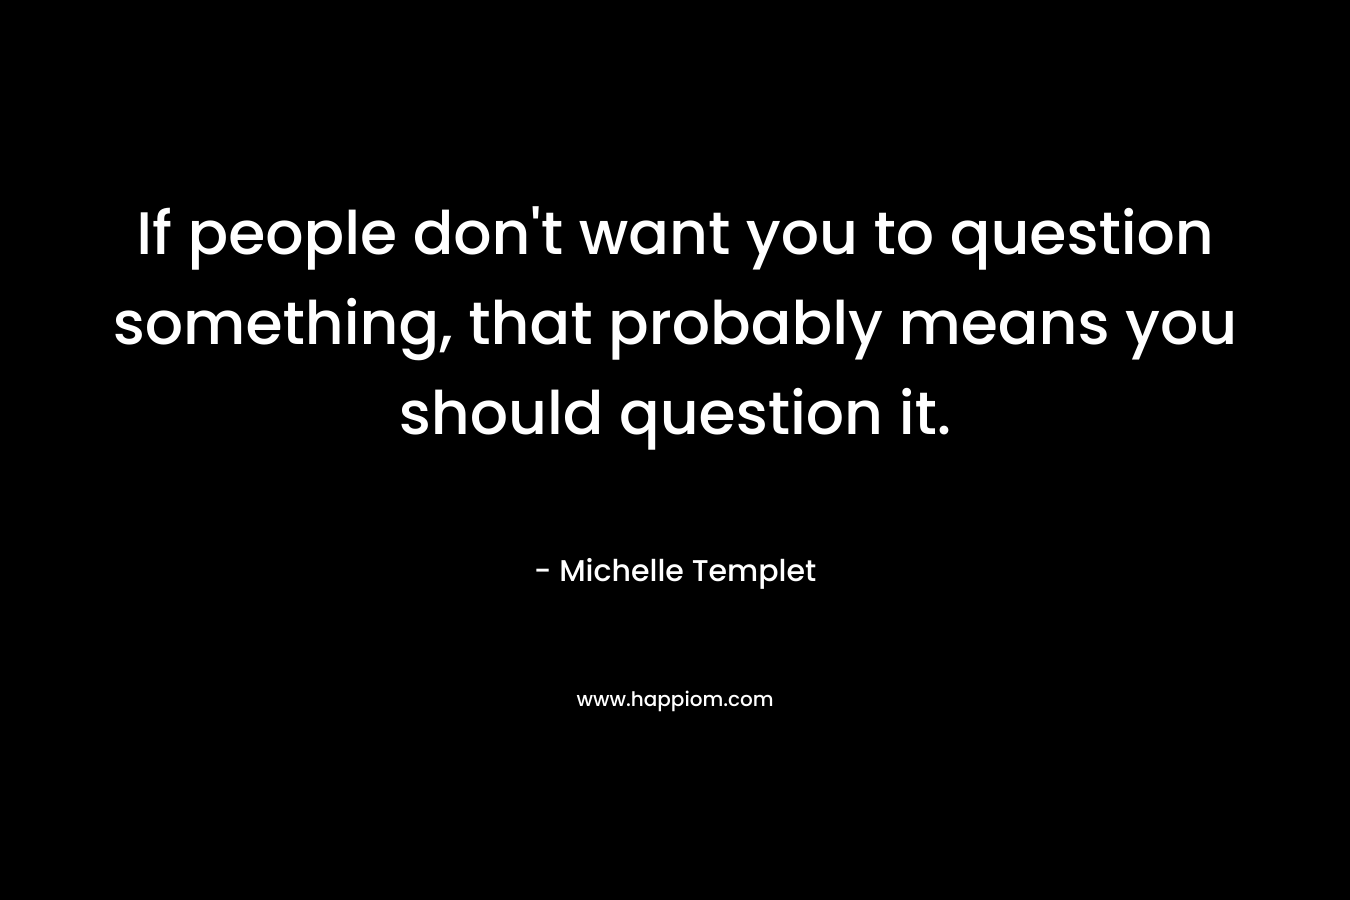 If people don't want you to question something, that probably means you should question it.